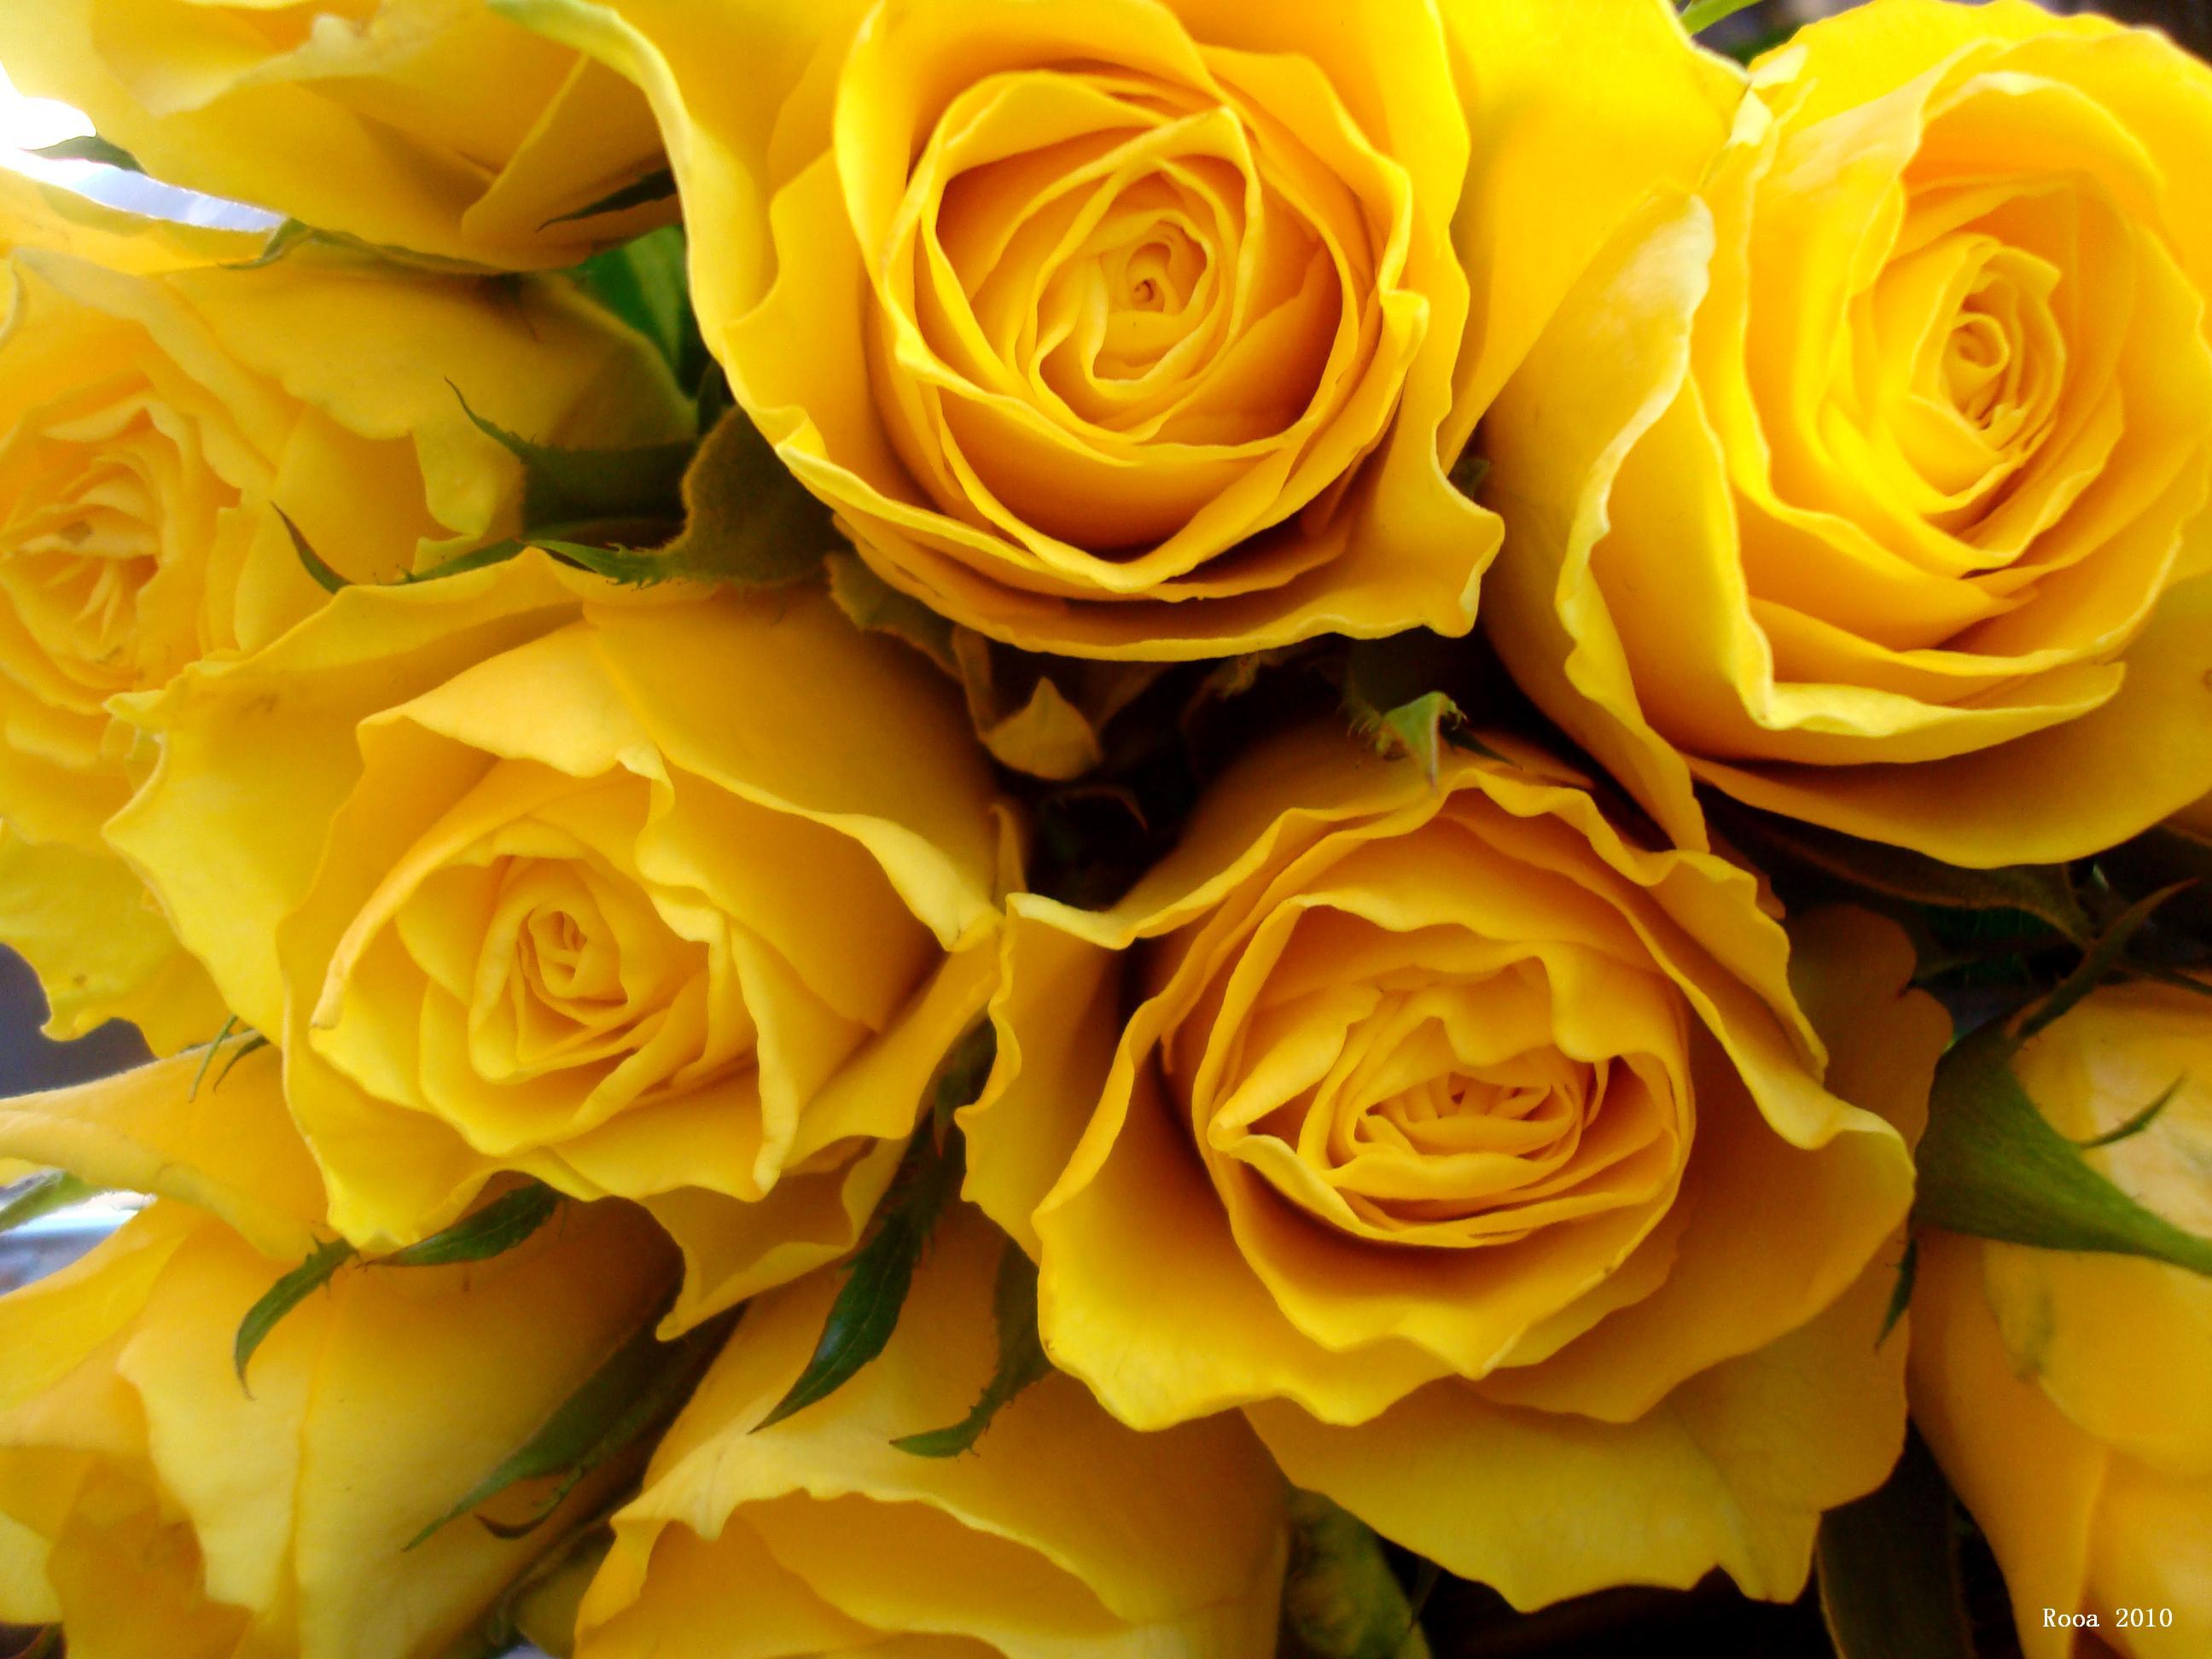 Yellow Rose Hd Images Free Download / Yellow Roses 77 2880x1800 : Wallpapers13.com / Download it